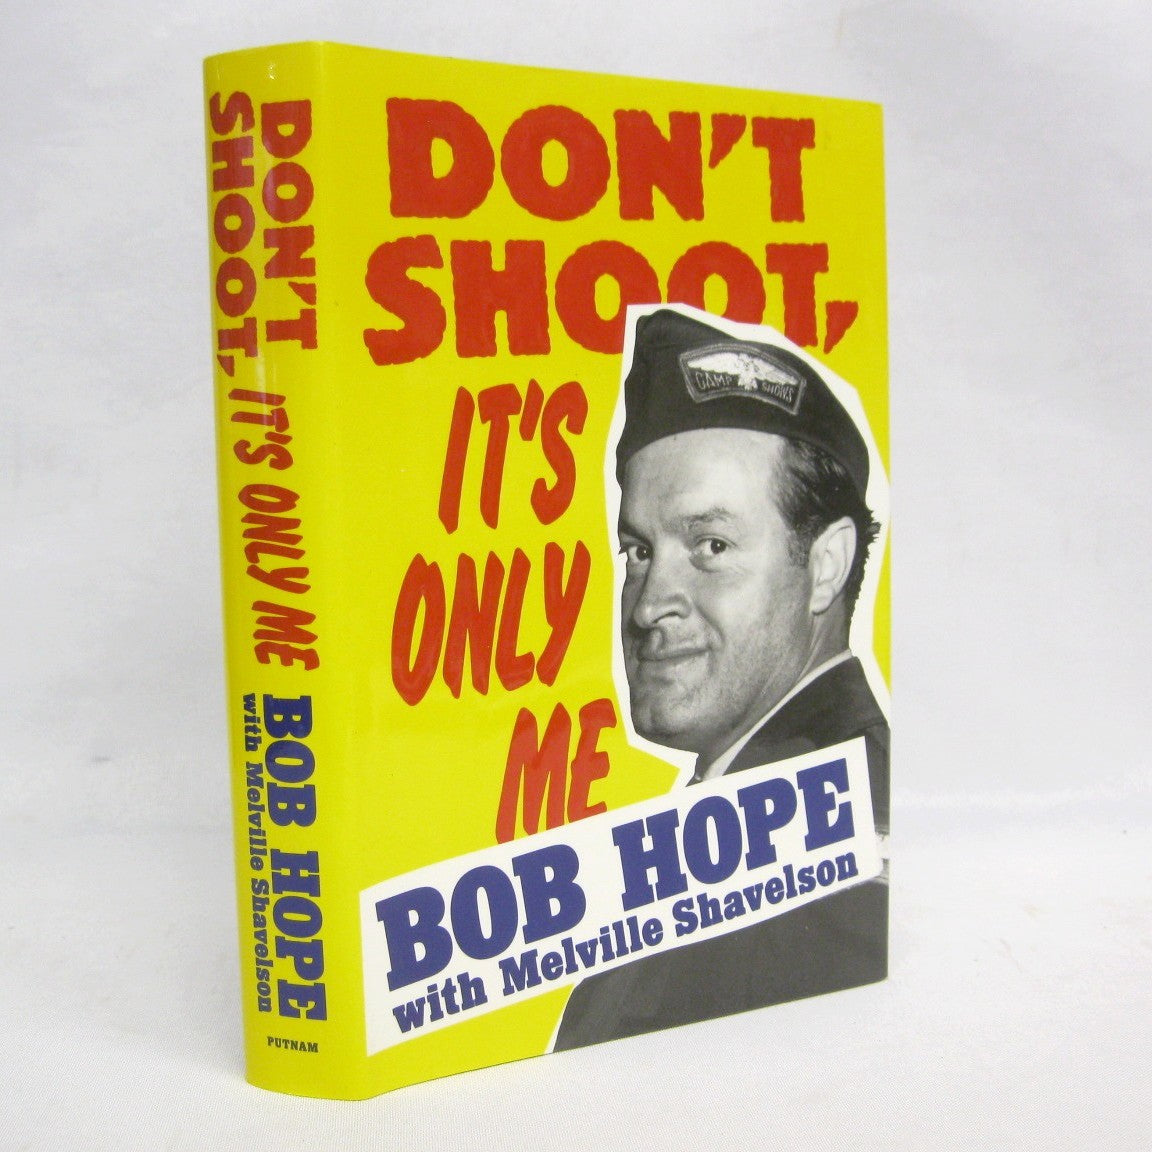 Don't Shoot It's Only Me by Bob Hope